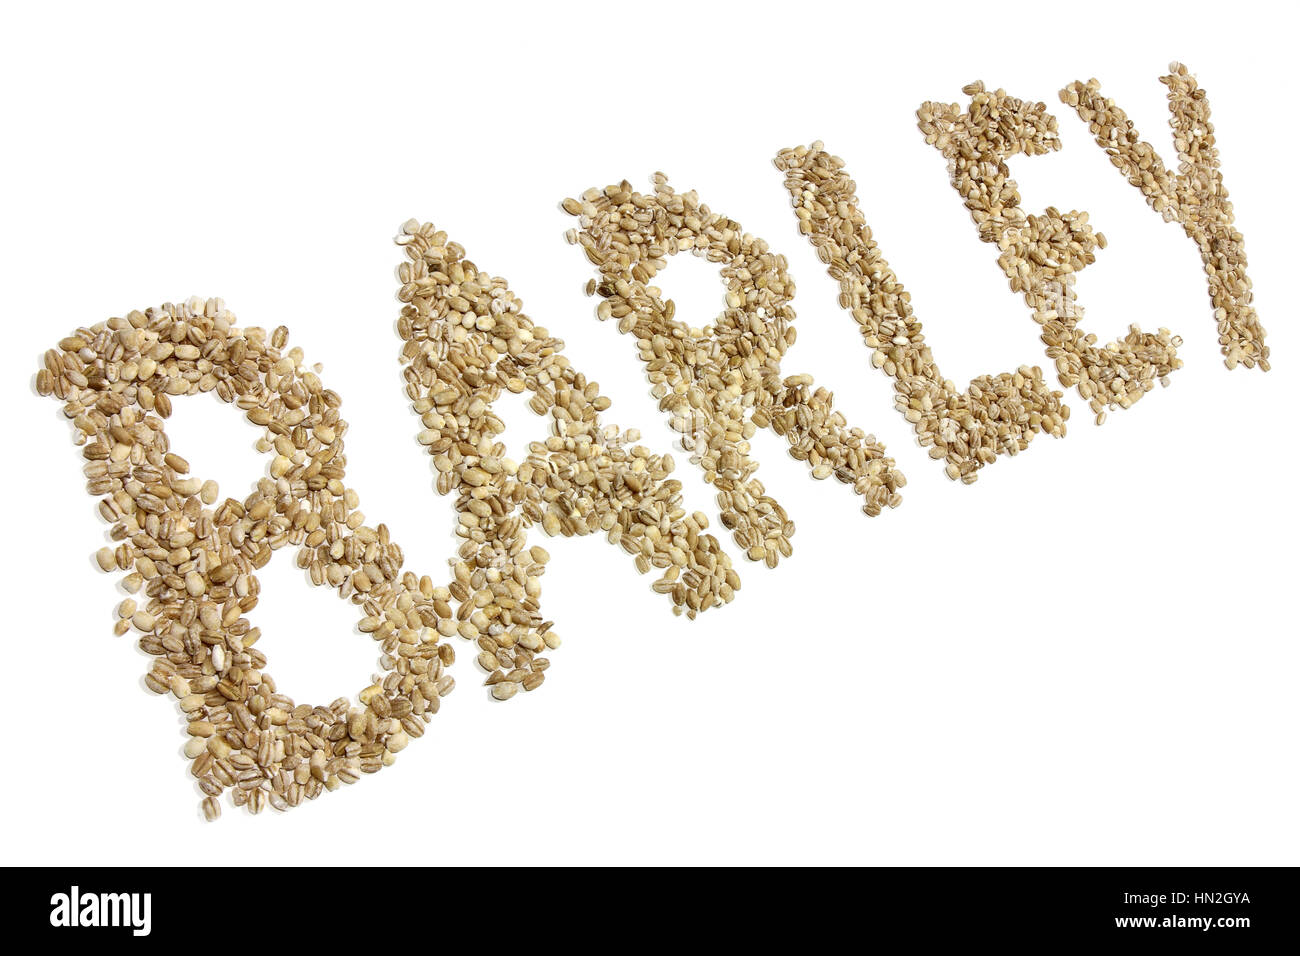 BARLEY written with barley grains isolated on white background Stock Photo